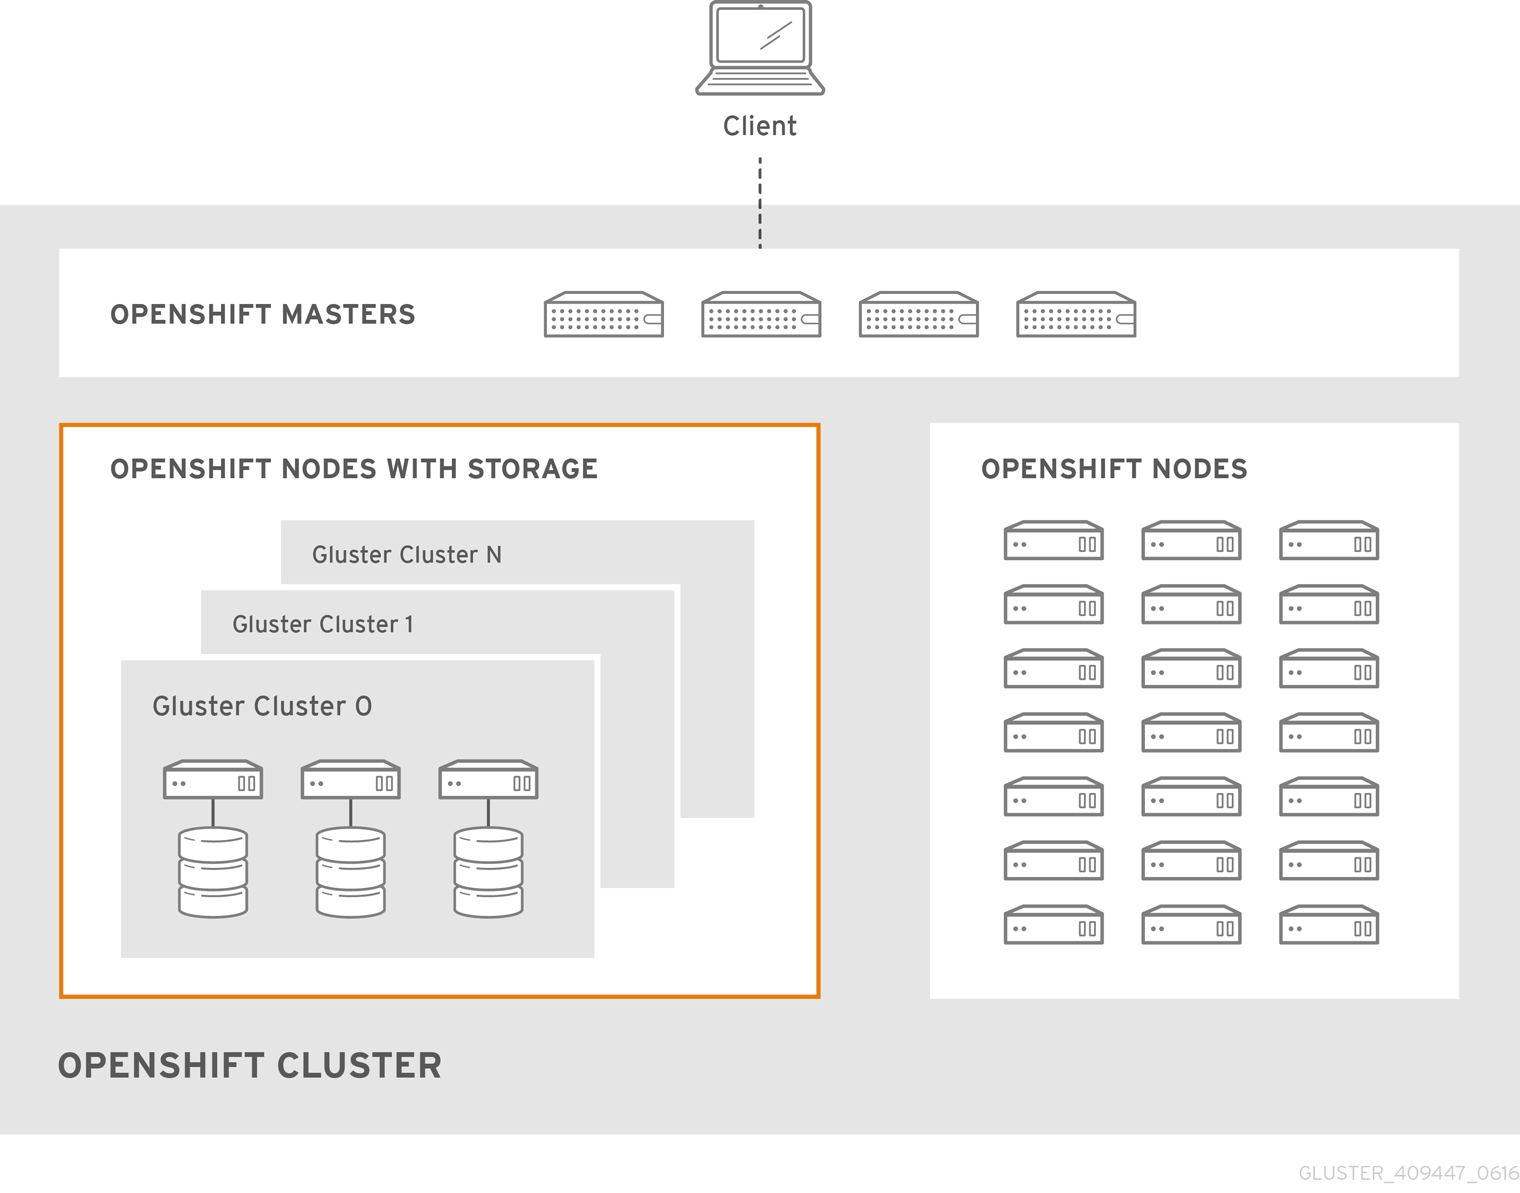 Architecture - Converged Mode for OpenShift Container Platform